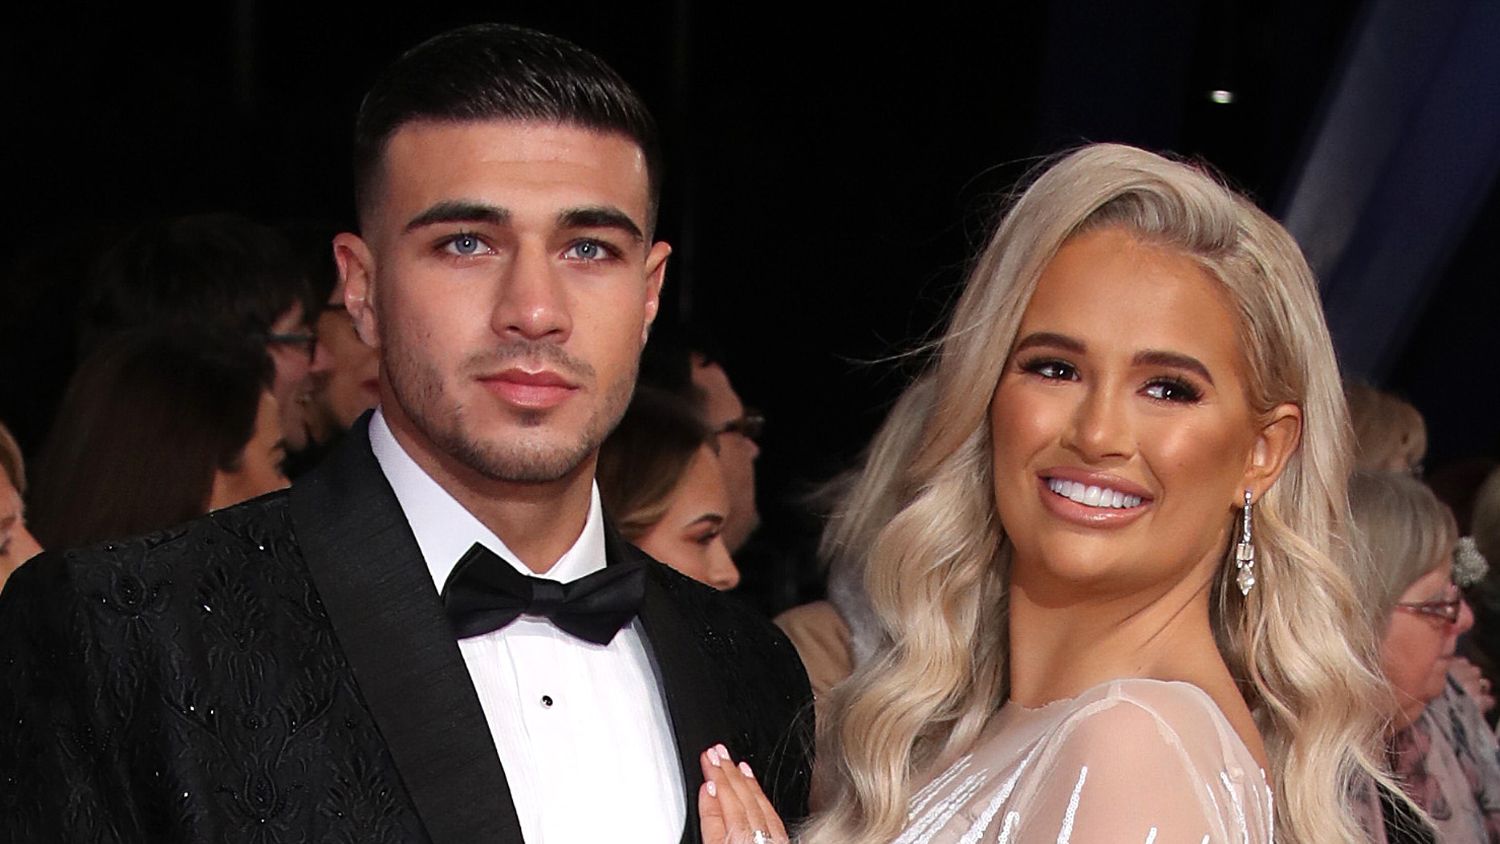 Molly-Mae Hauge surprises her boyfriend Tommy Fury with a romantic getaway